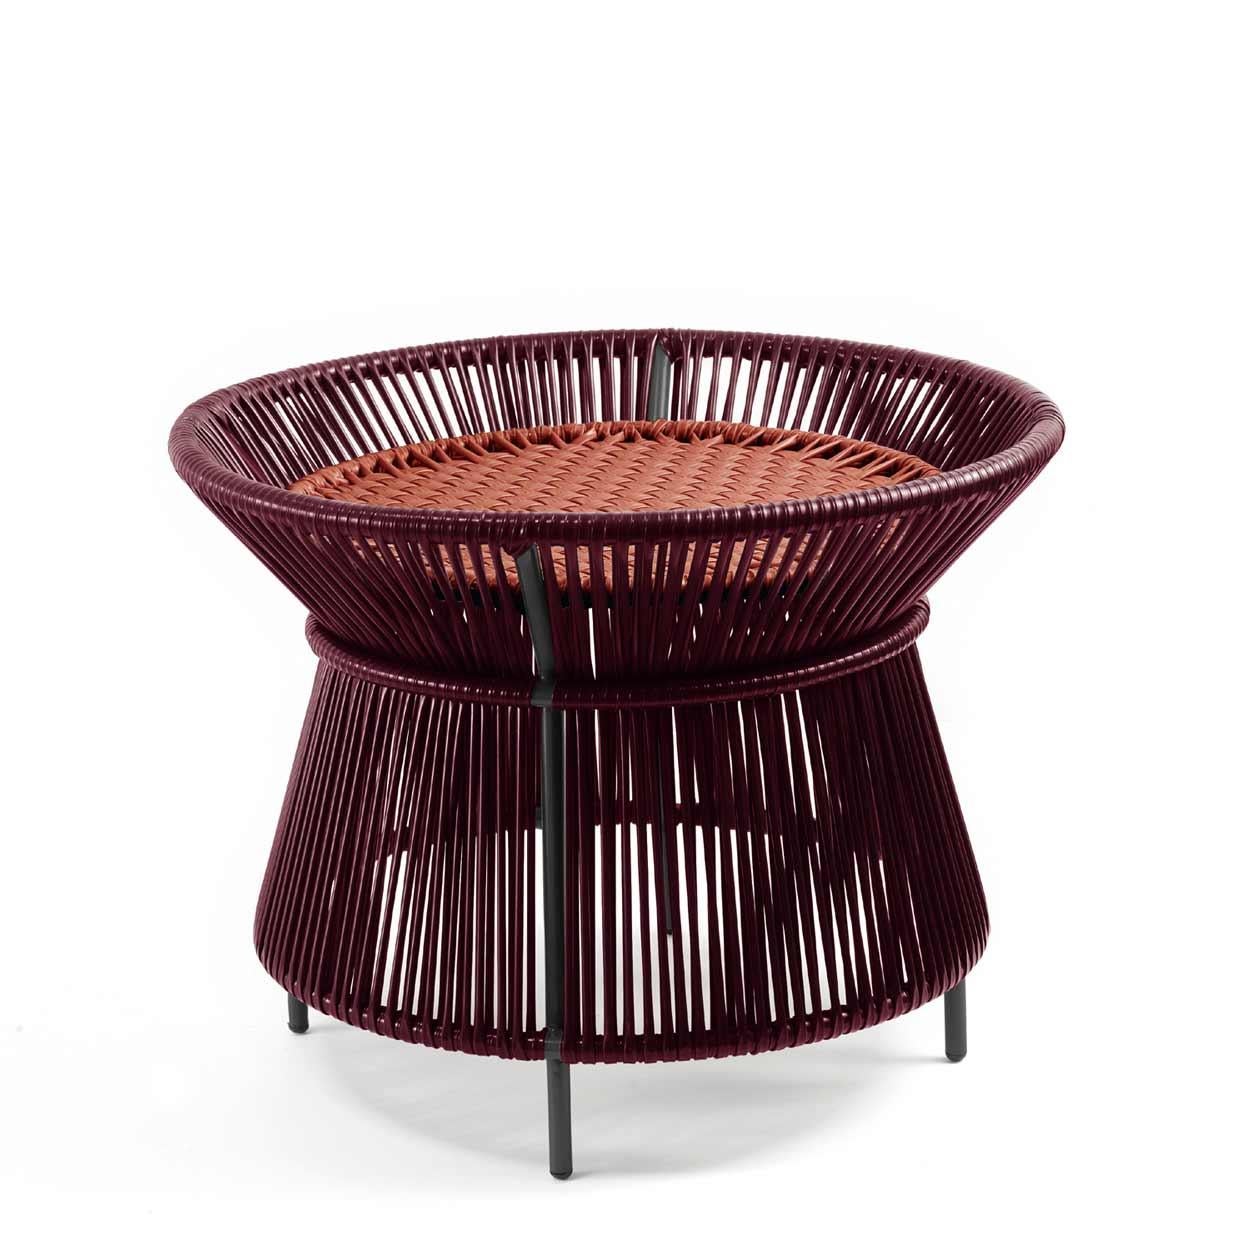 Contemporary Ames Indoor or Outdoor Caribe CHIC Basket Table by Sebastian Herkner For Sale